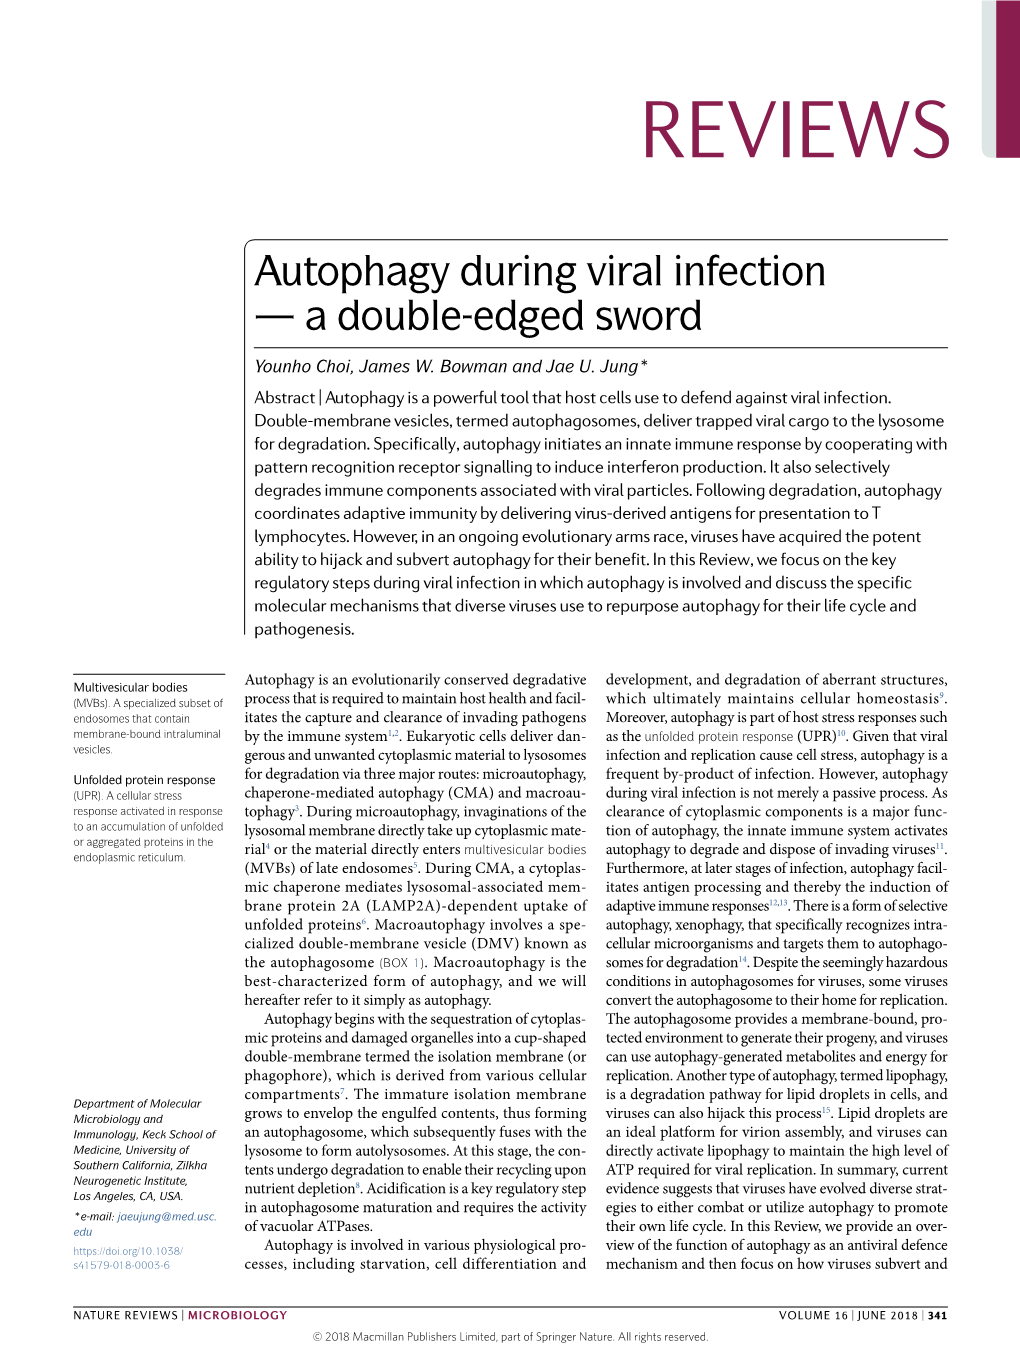 Autophagy During Viral Infection — a Double-Edged Sword